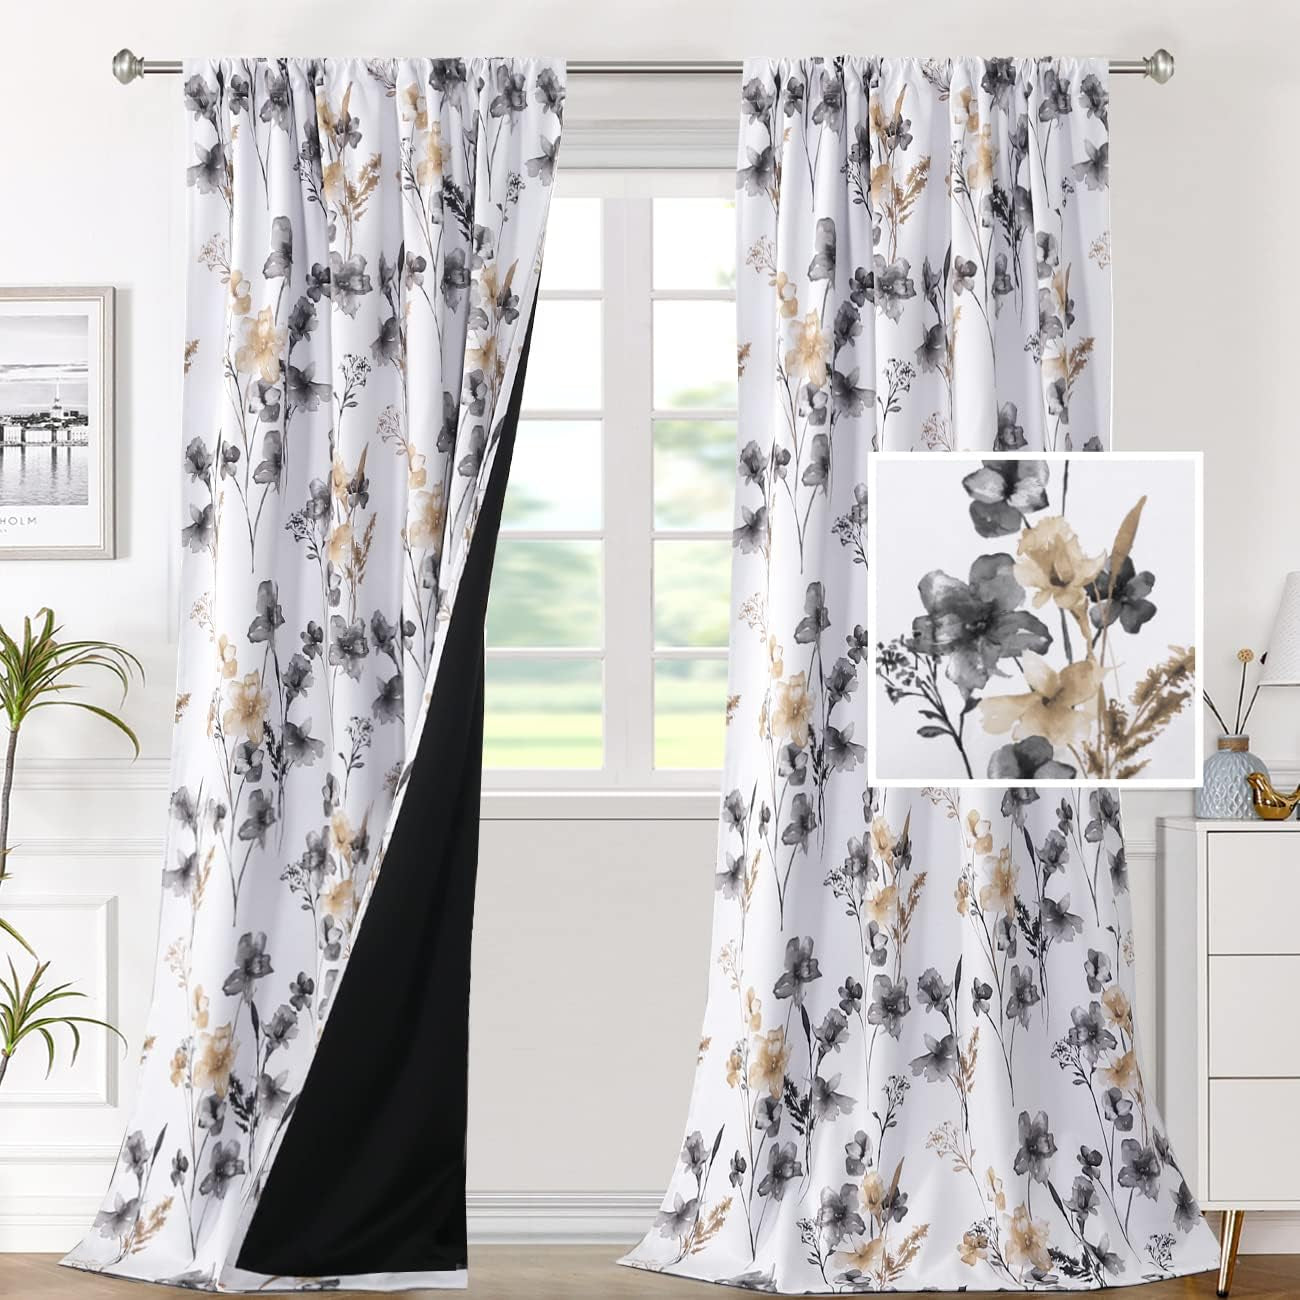 H.VERSAILTEX 100% Blackout Curtains for Bedroom Cattleya Floral Printed Drapes 84 Inches Long Leah Floral Pattern Full Light Blocking Drapes with Black Liner Rod Pocket 2 Panels, Navy/Taupe  H.VERSAILTEX Grey/Taupe 52"W X 96"L 